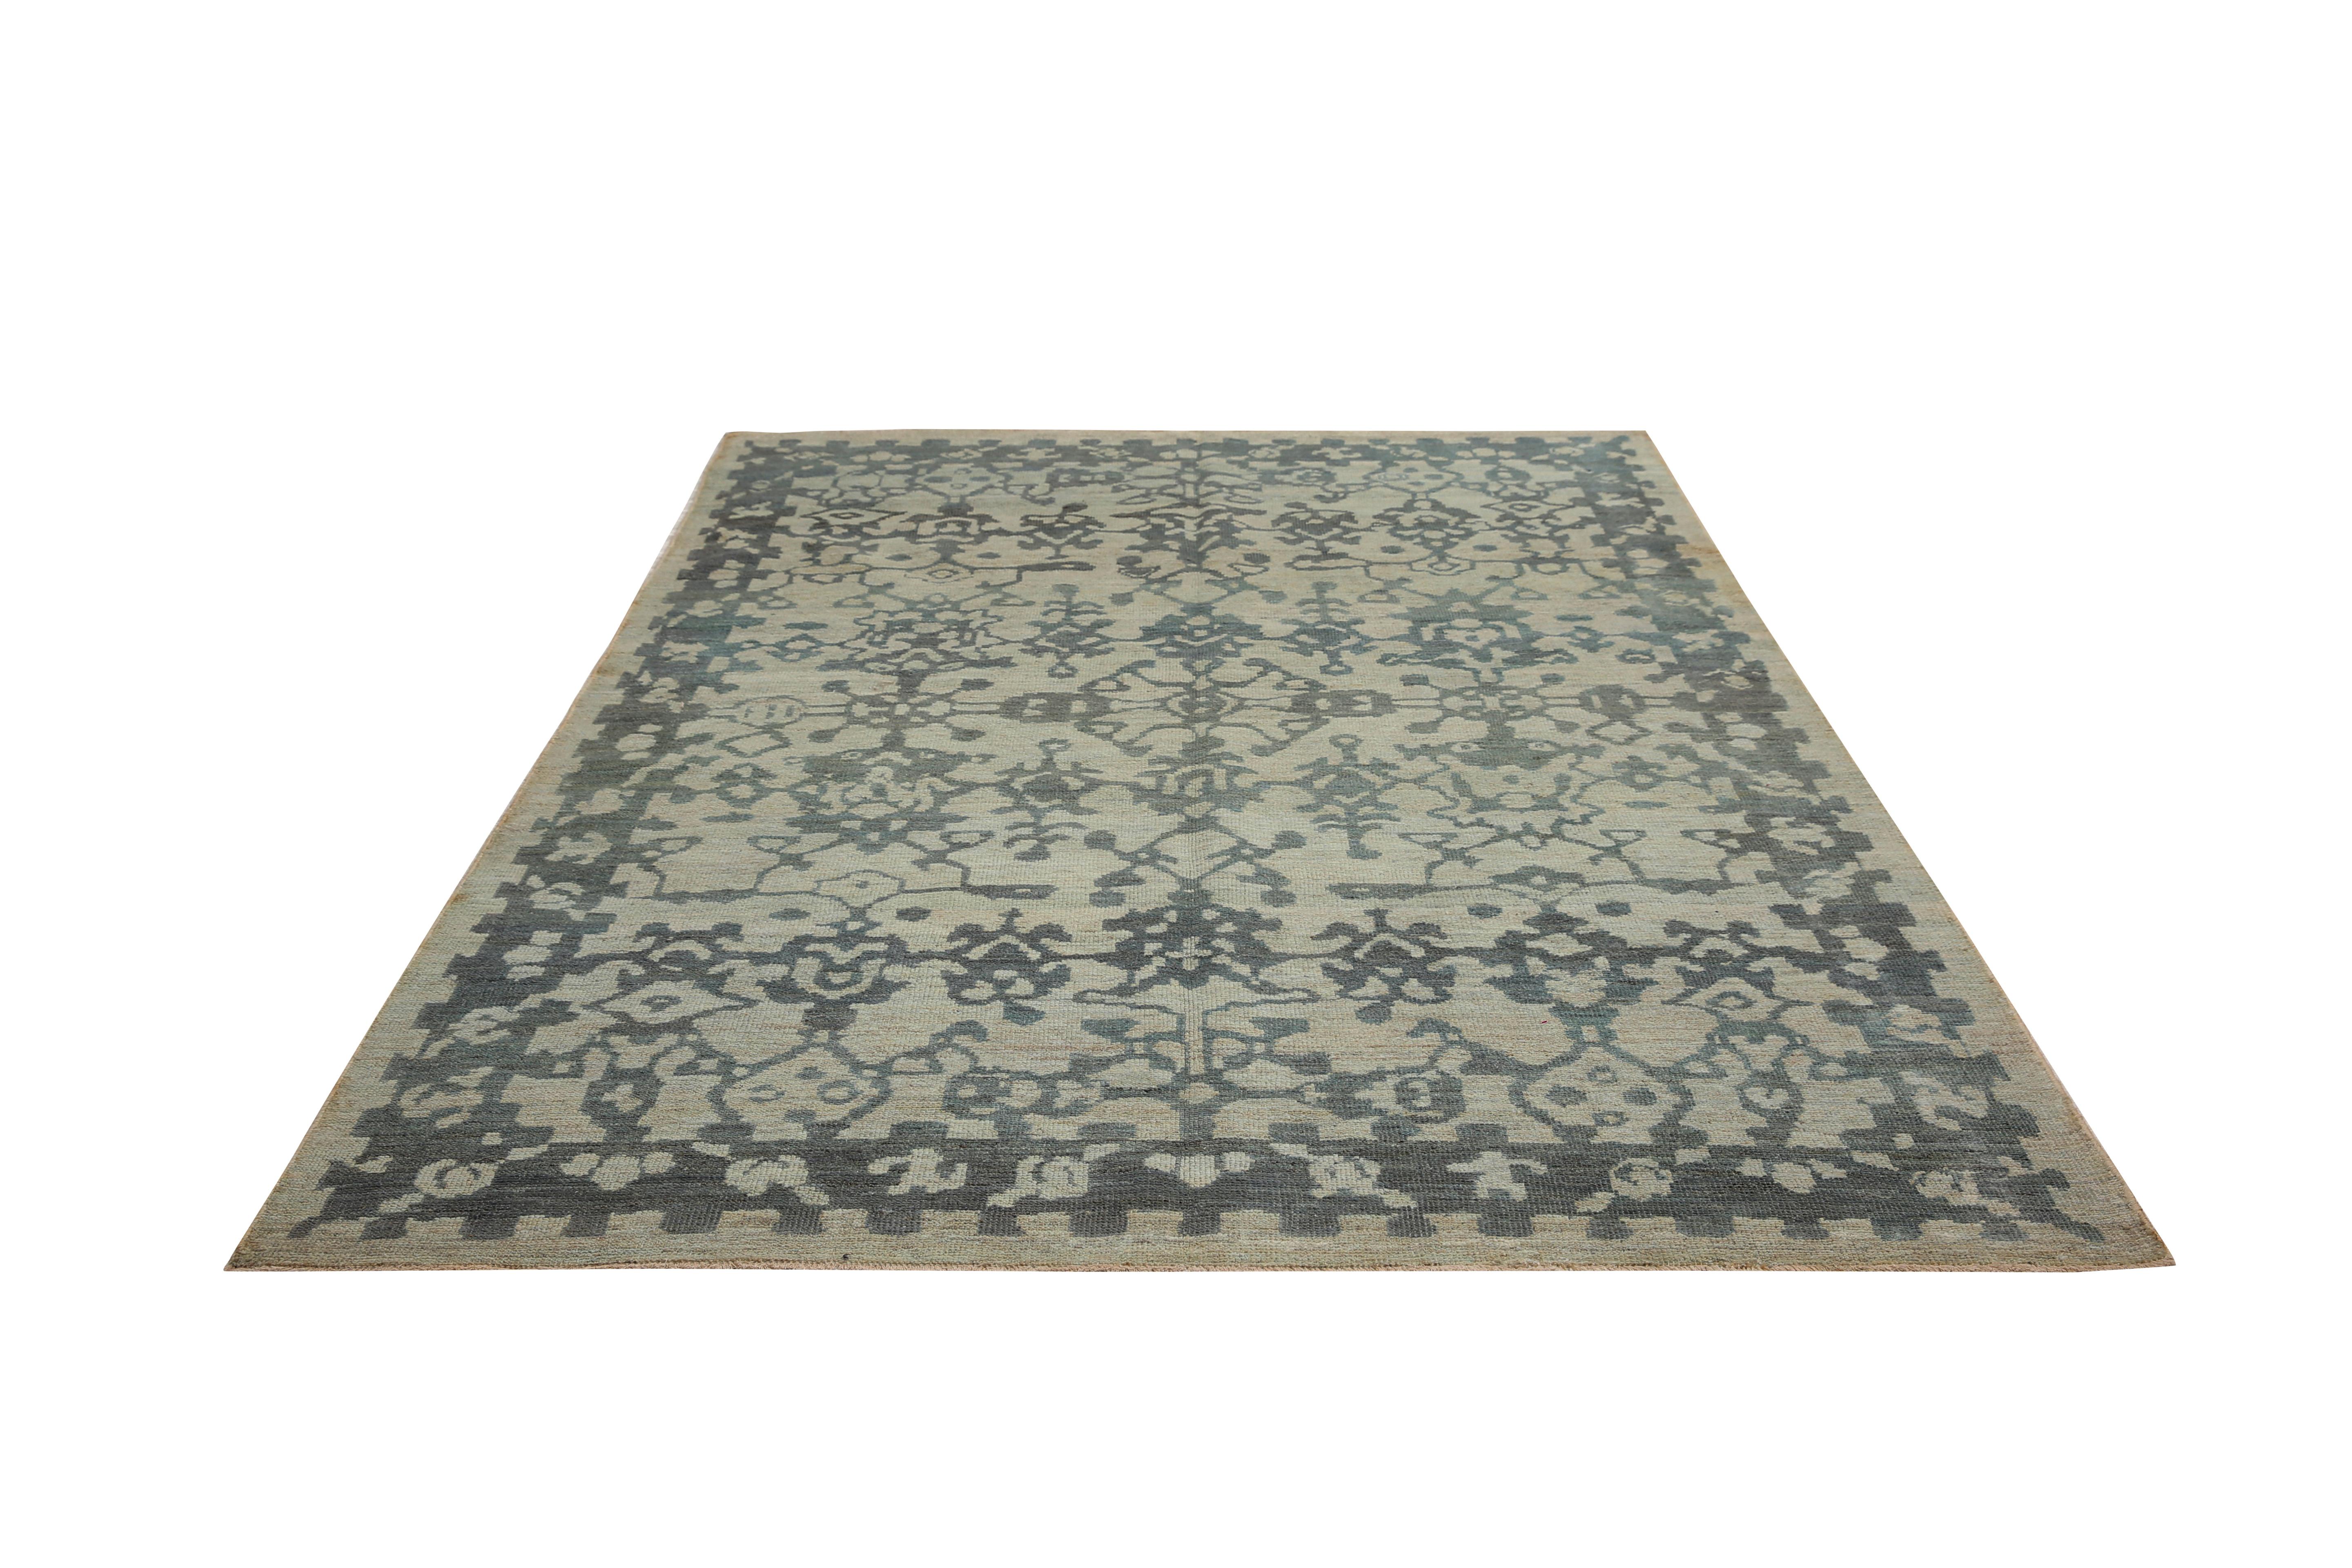 Wool Luxurious Handmade Sultanabad Rug - Transitional Design, Blue Tones - 5'10'' x 8 For Sale